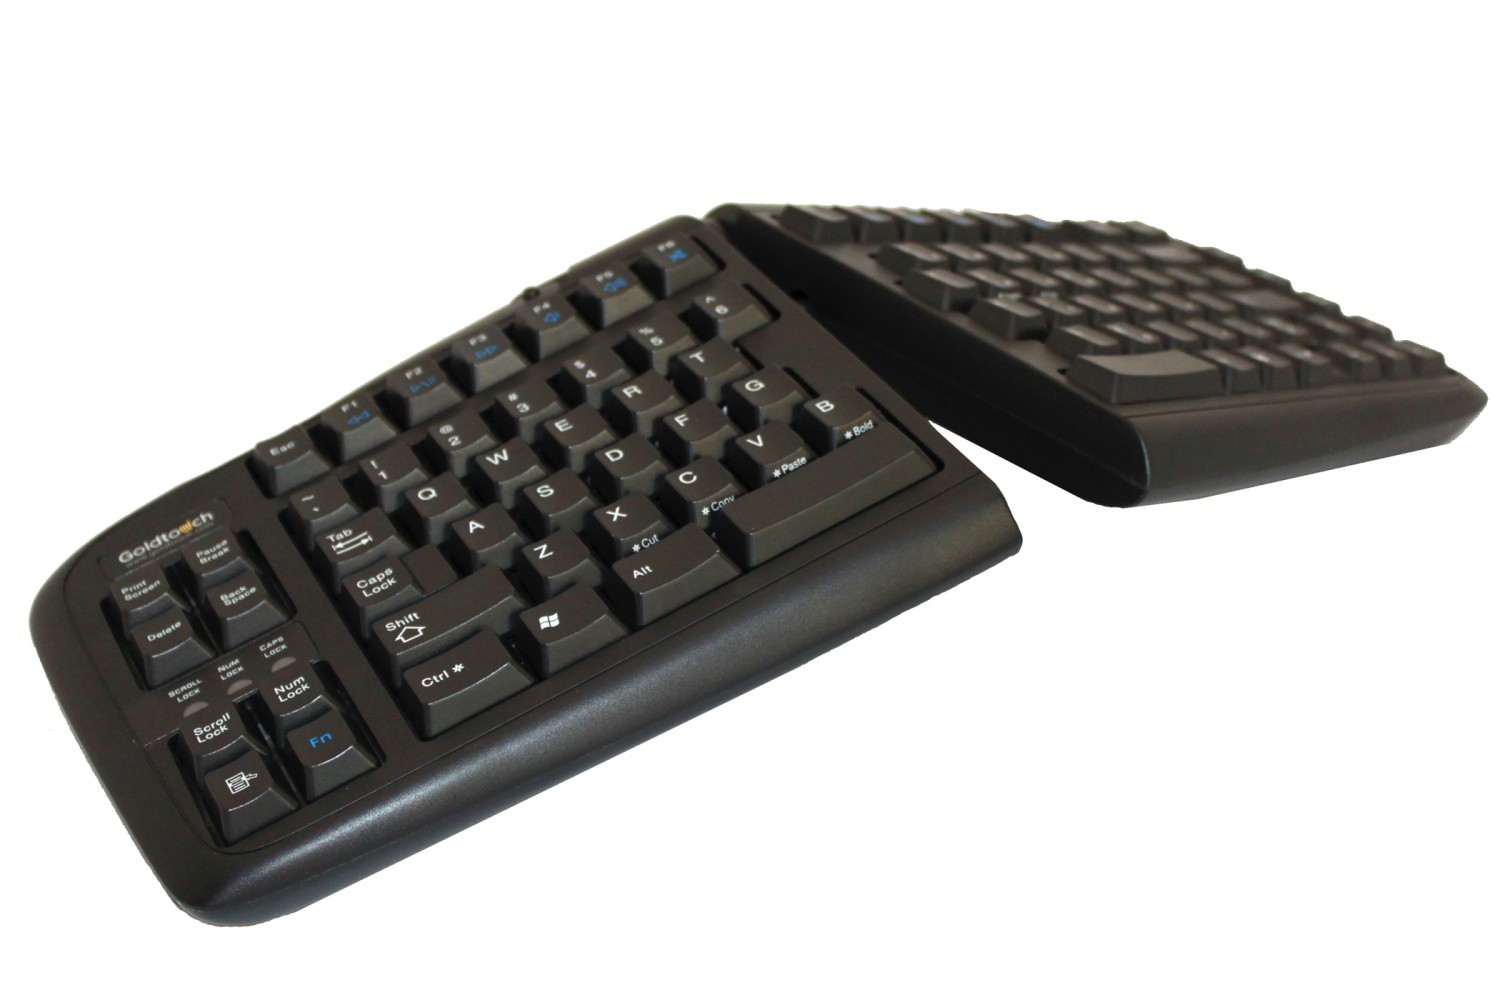 How to Clean Your Ergonomic Keyboard (and Why You Should) - Goldtouch